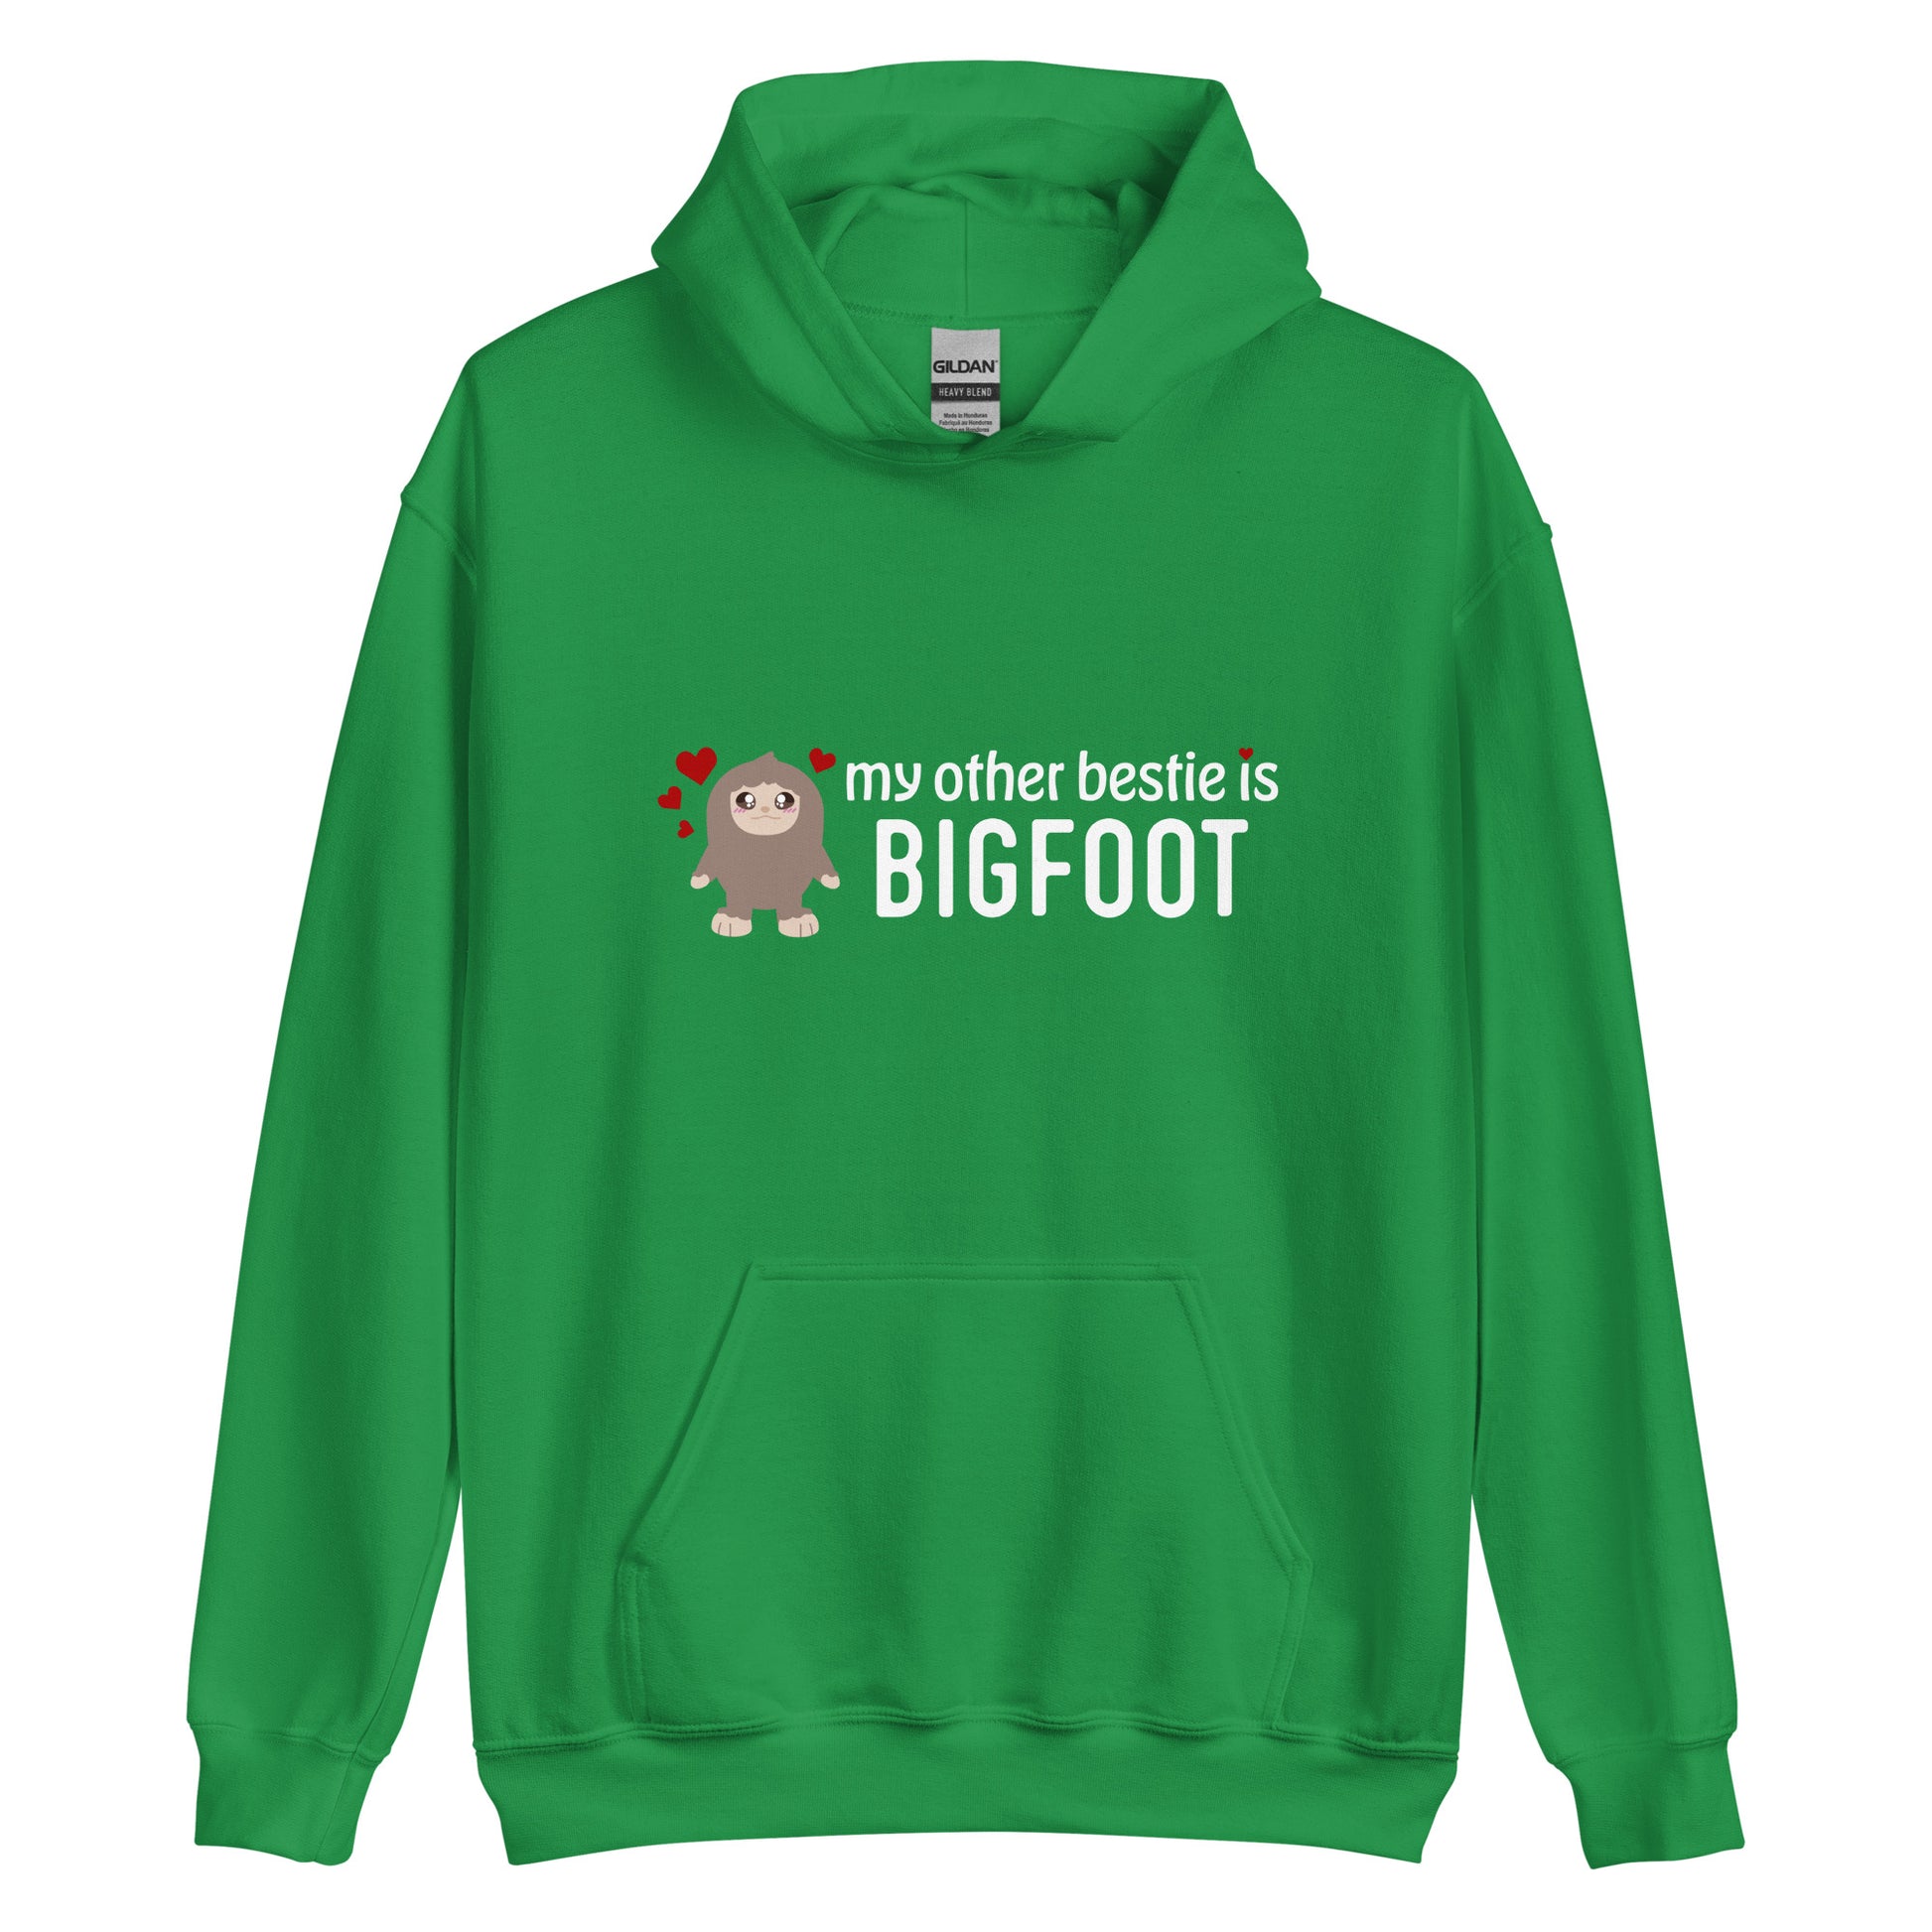 A green hooded sweatshirt featuring a cutesy illustration of Bigfoot surrounded by hearts. Text next to Bigfoot reads "my other bestie is Bigfoot"